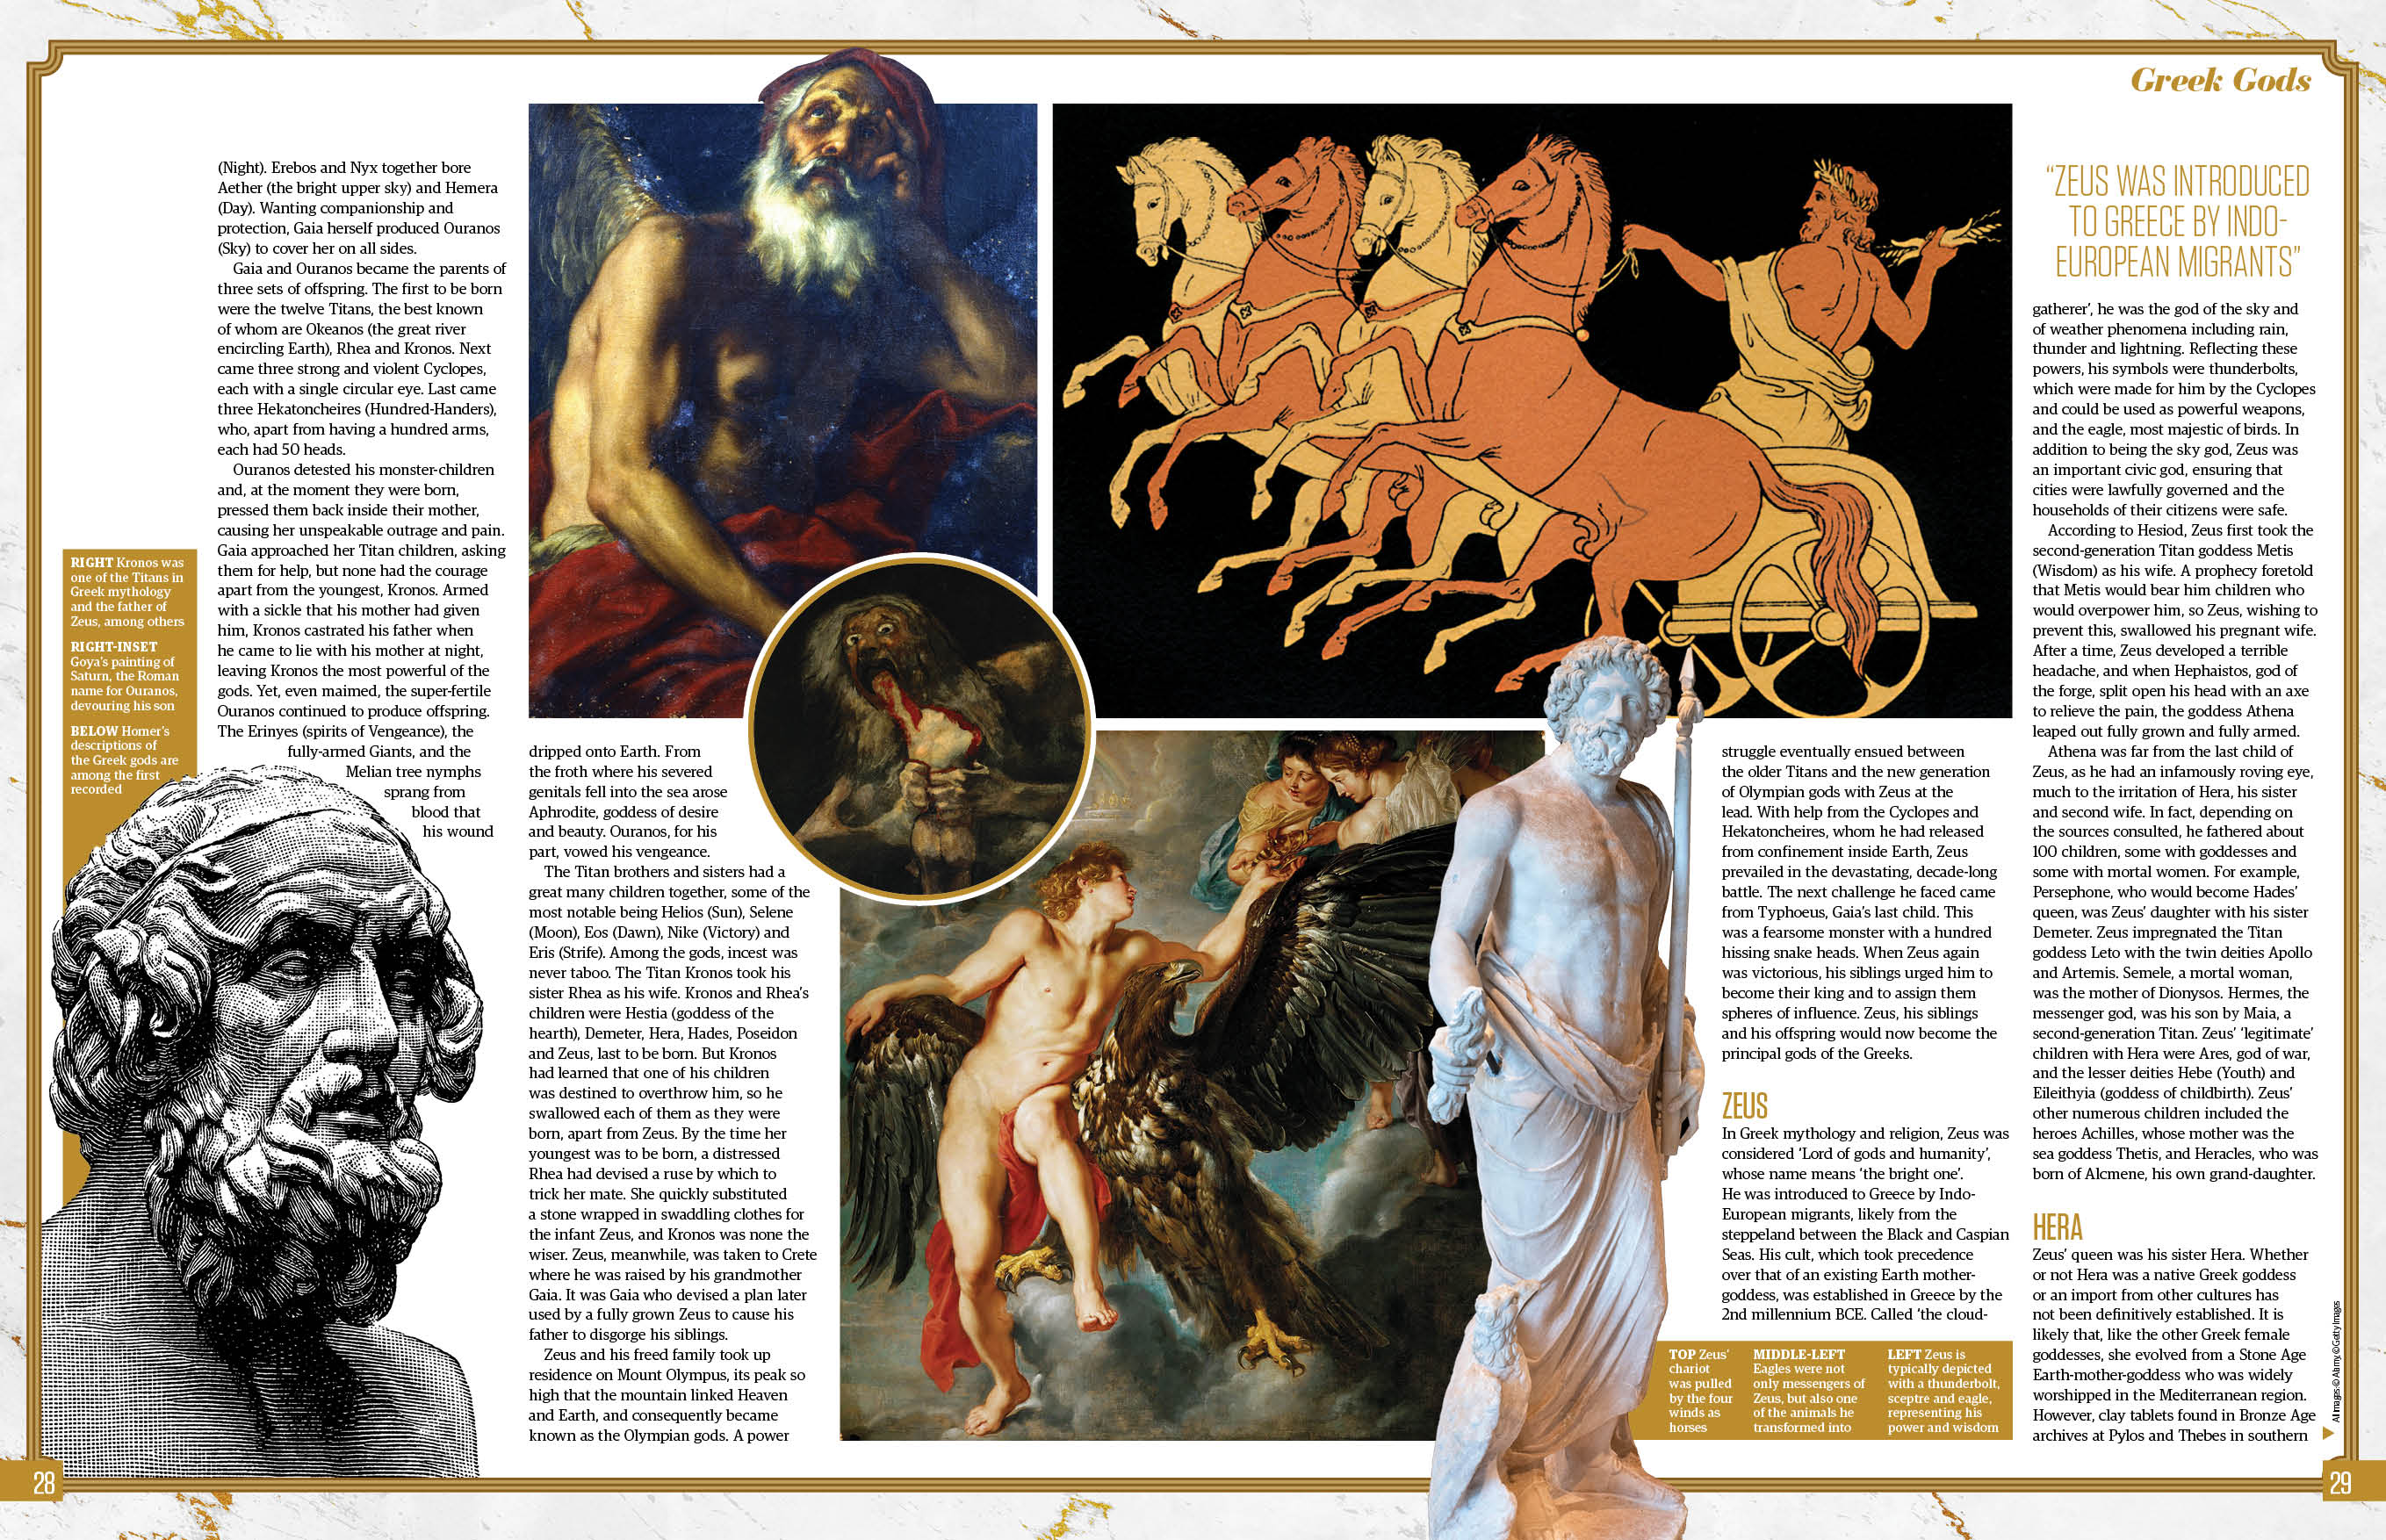 Greek Gods, double page spread, All About History 117